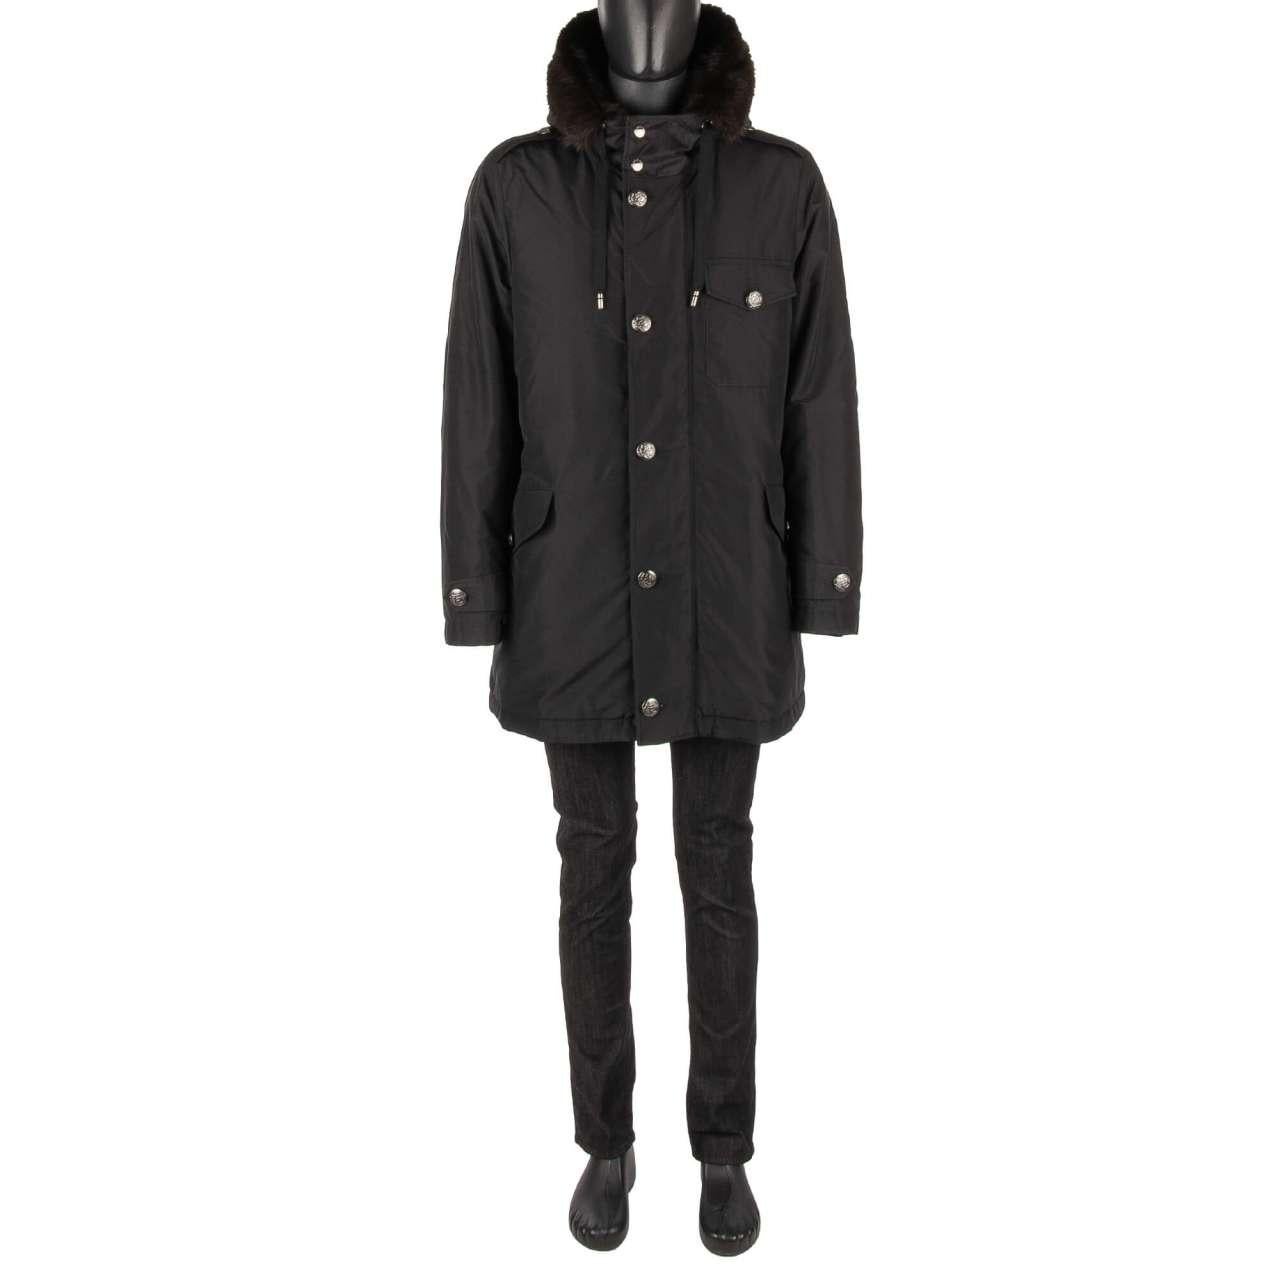 Dolce & Gabbana Silk Parka Jacket with Detachable Fur Lining and Hoody Black 50 For Sale 2